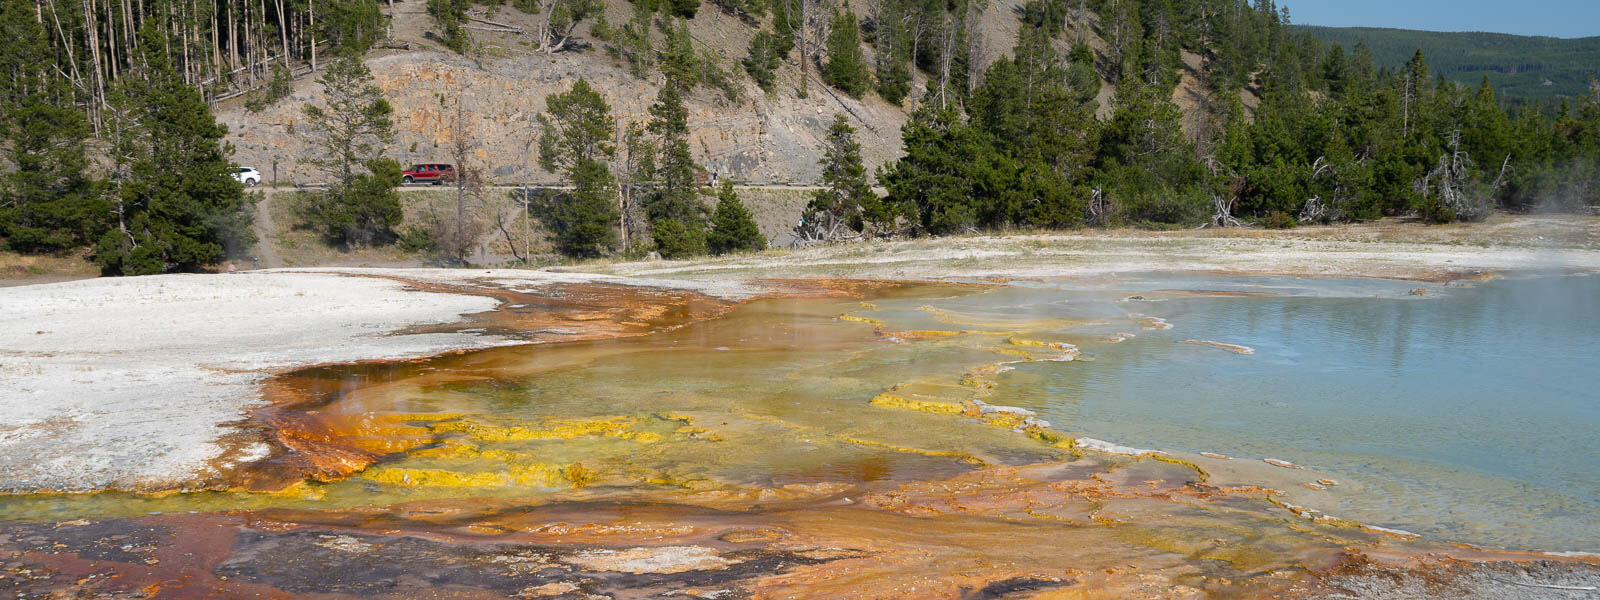 The Colorful Hot Springs of Yellowstone